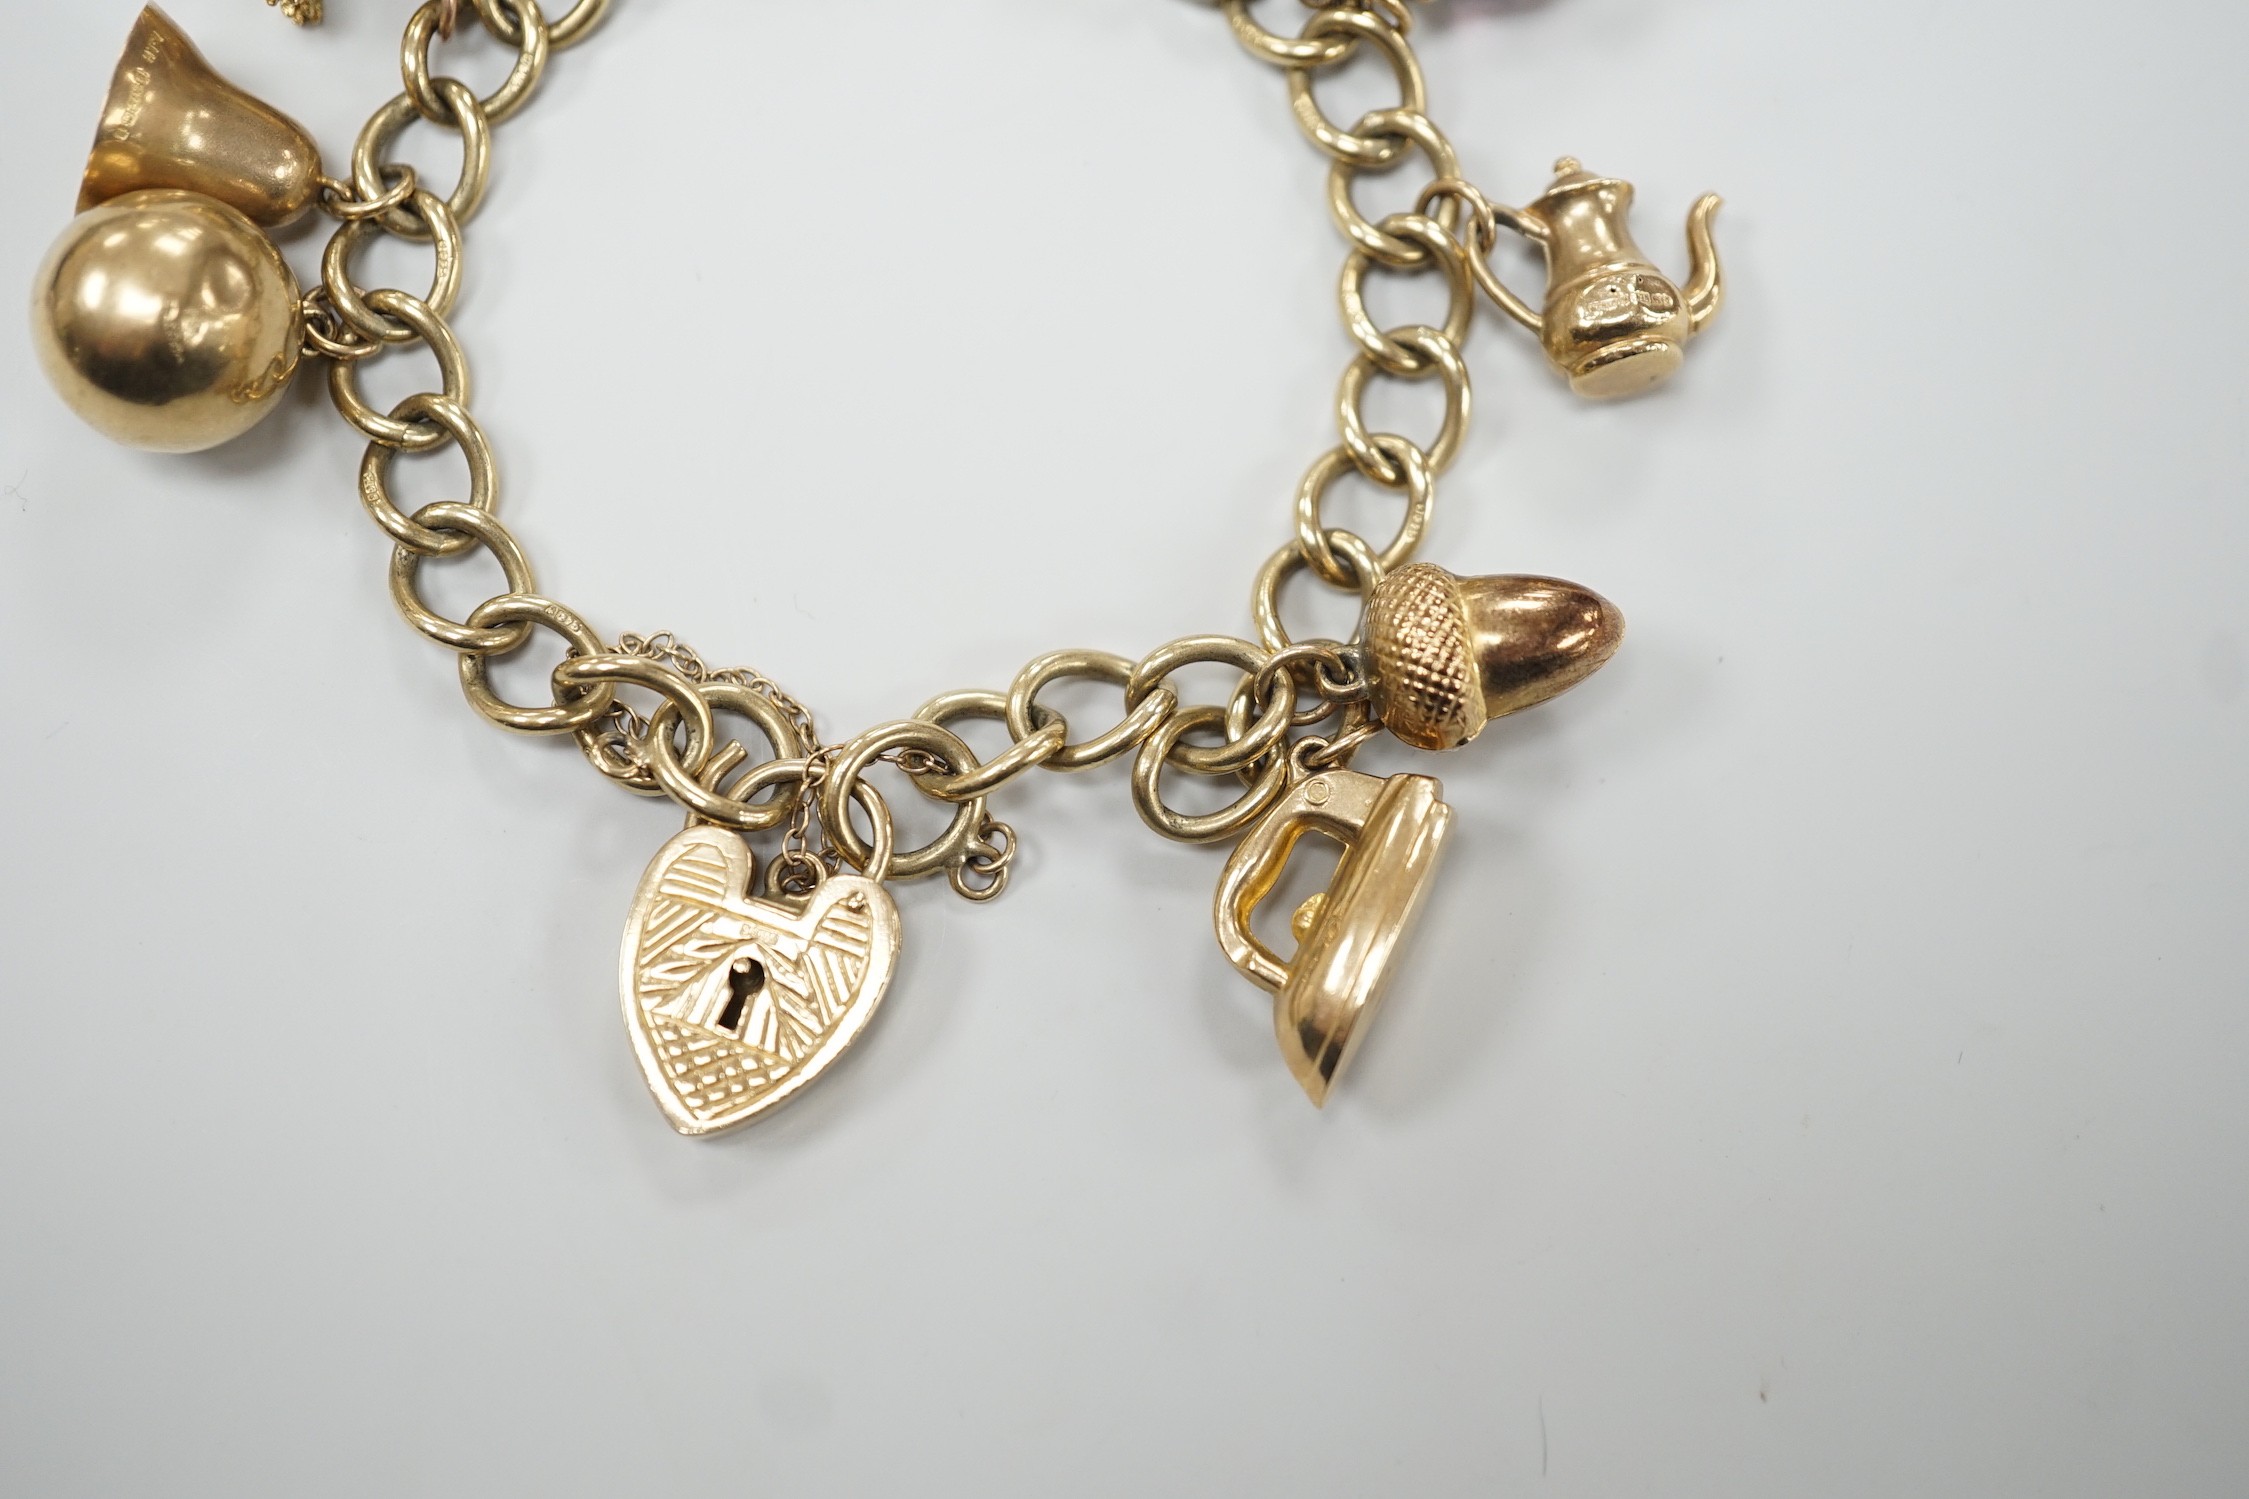 A 9ct gold oval link charm bracelet, hung with ten assorted charms including nine 9ct gold, gross weight 31.9 grams.